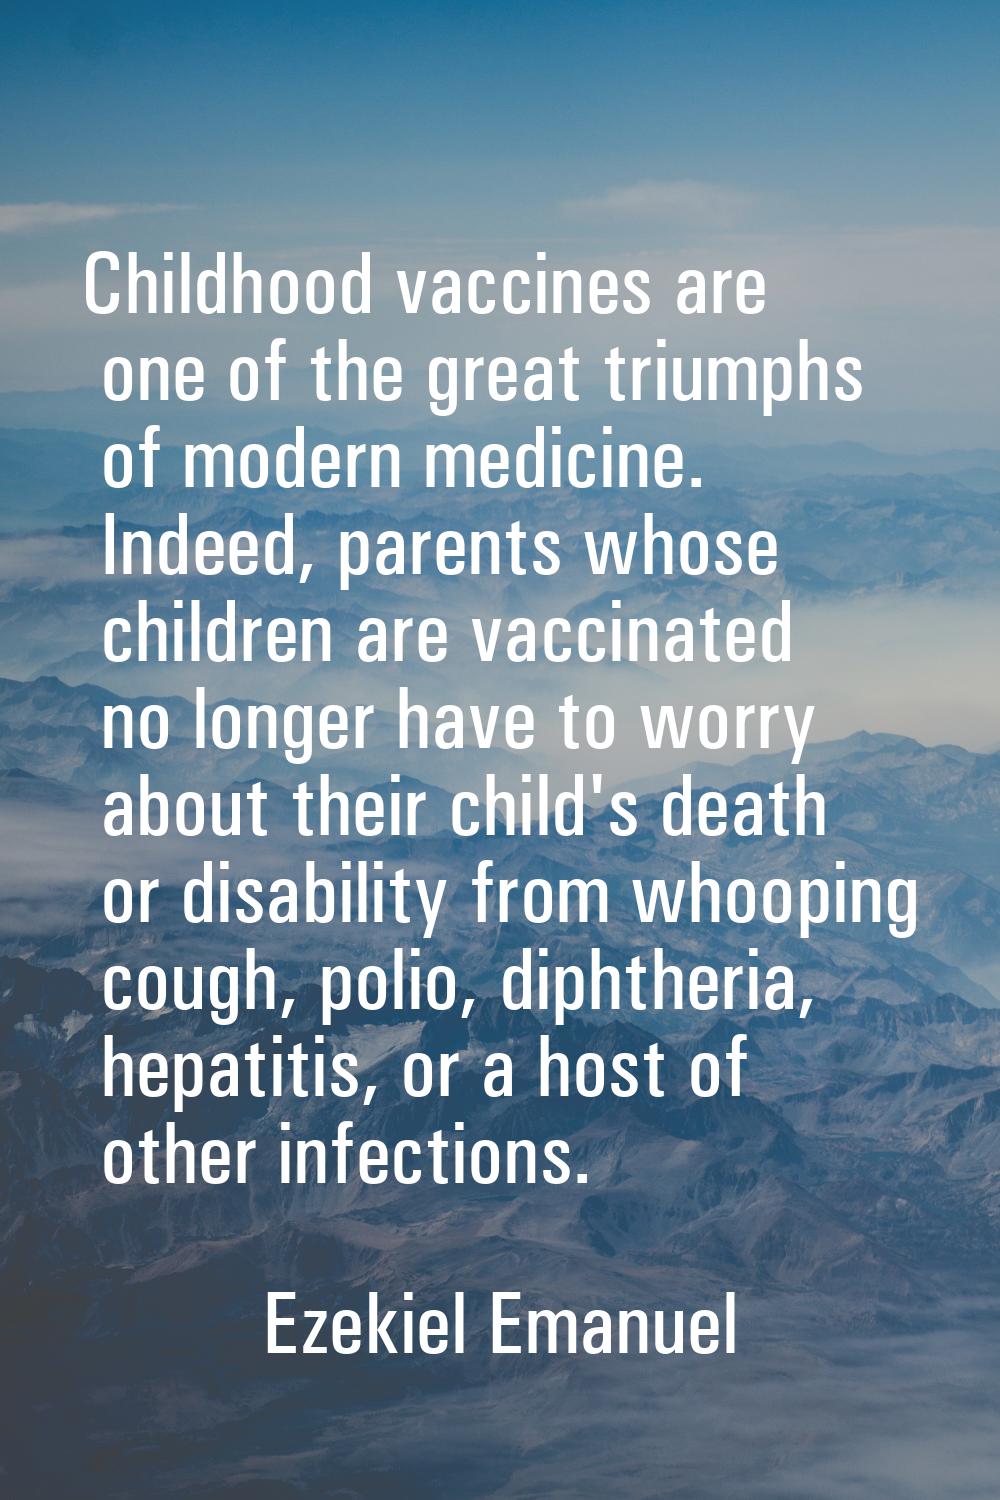 Childhood vaccines are one of the great triumphs of modern medicine. Indeed, parents whose children